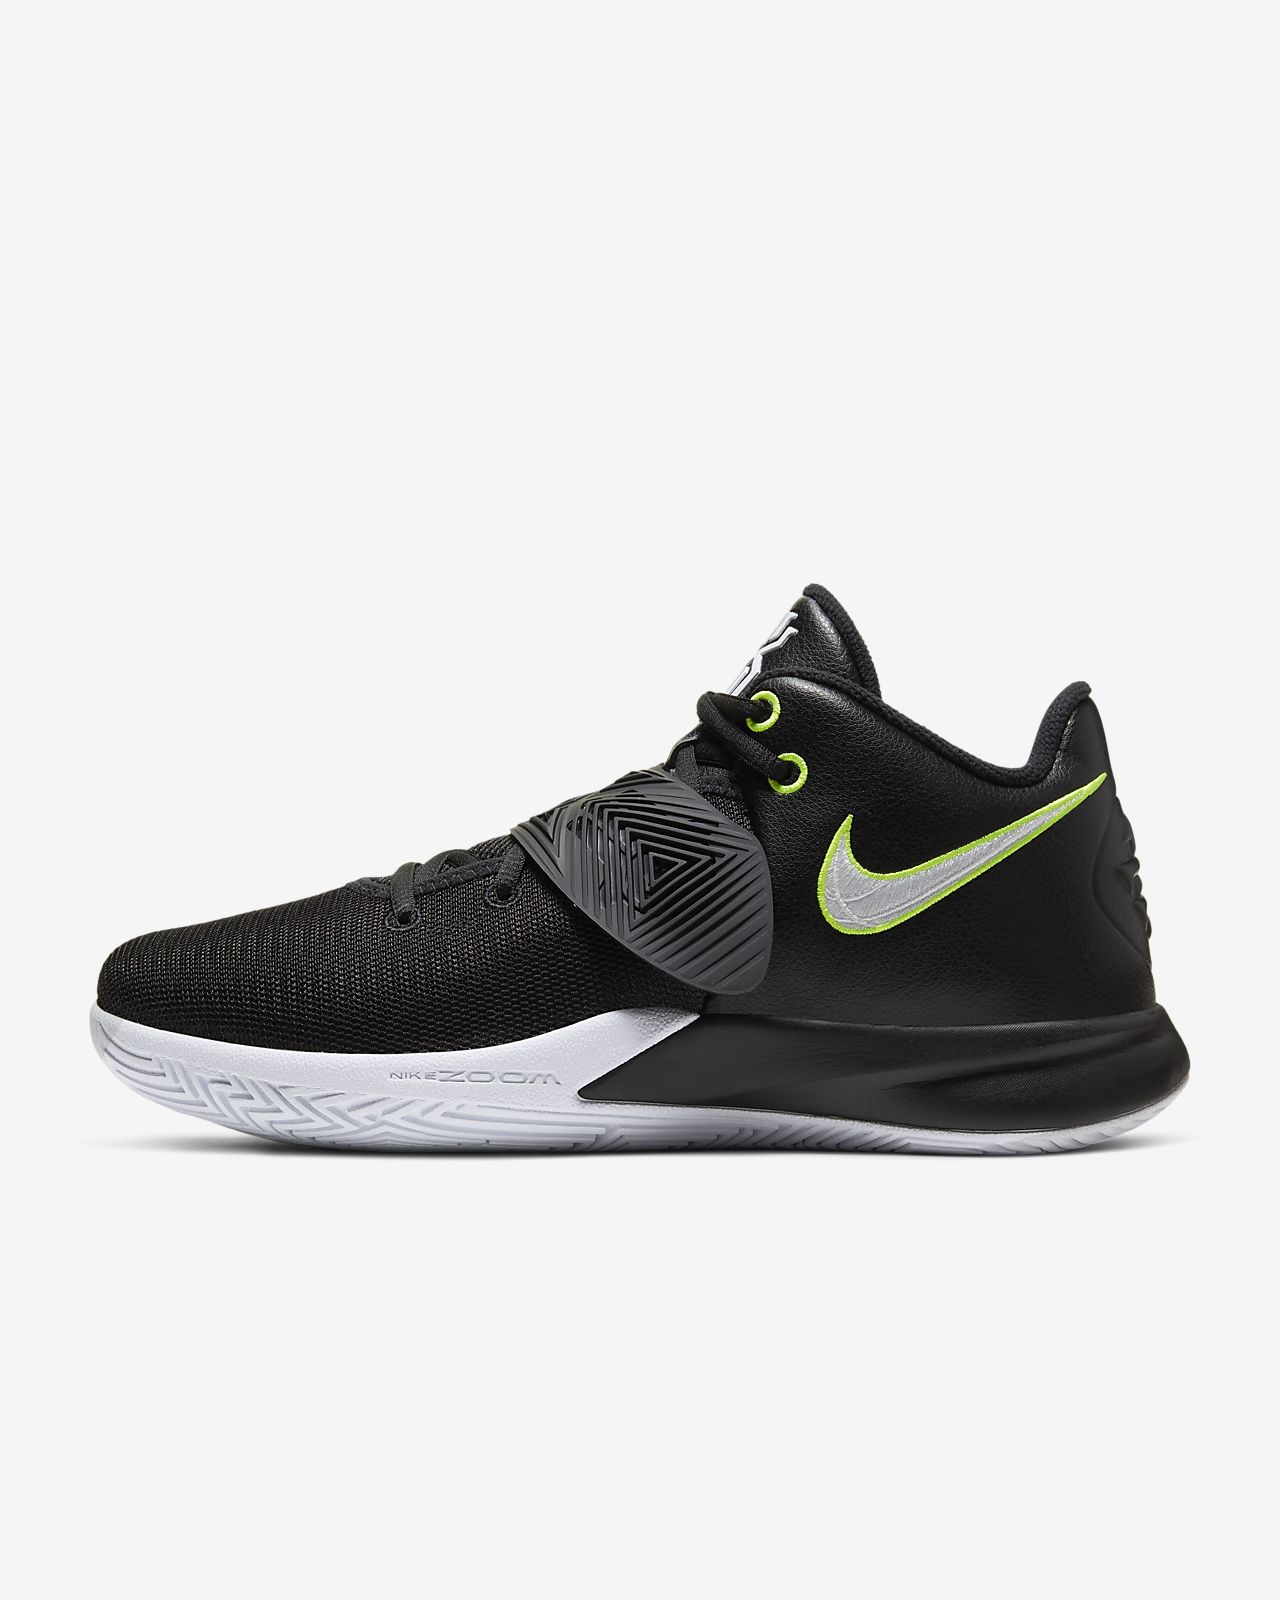 Kyrie Irving Shoes Flytrap 3 / Nike Kyrie Irving Flytrap 3 III ...